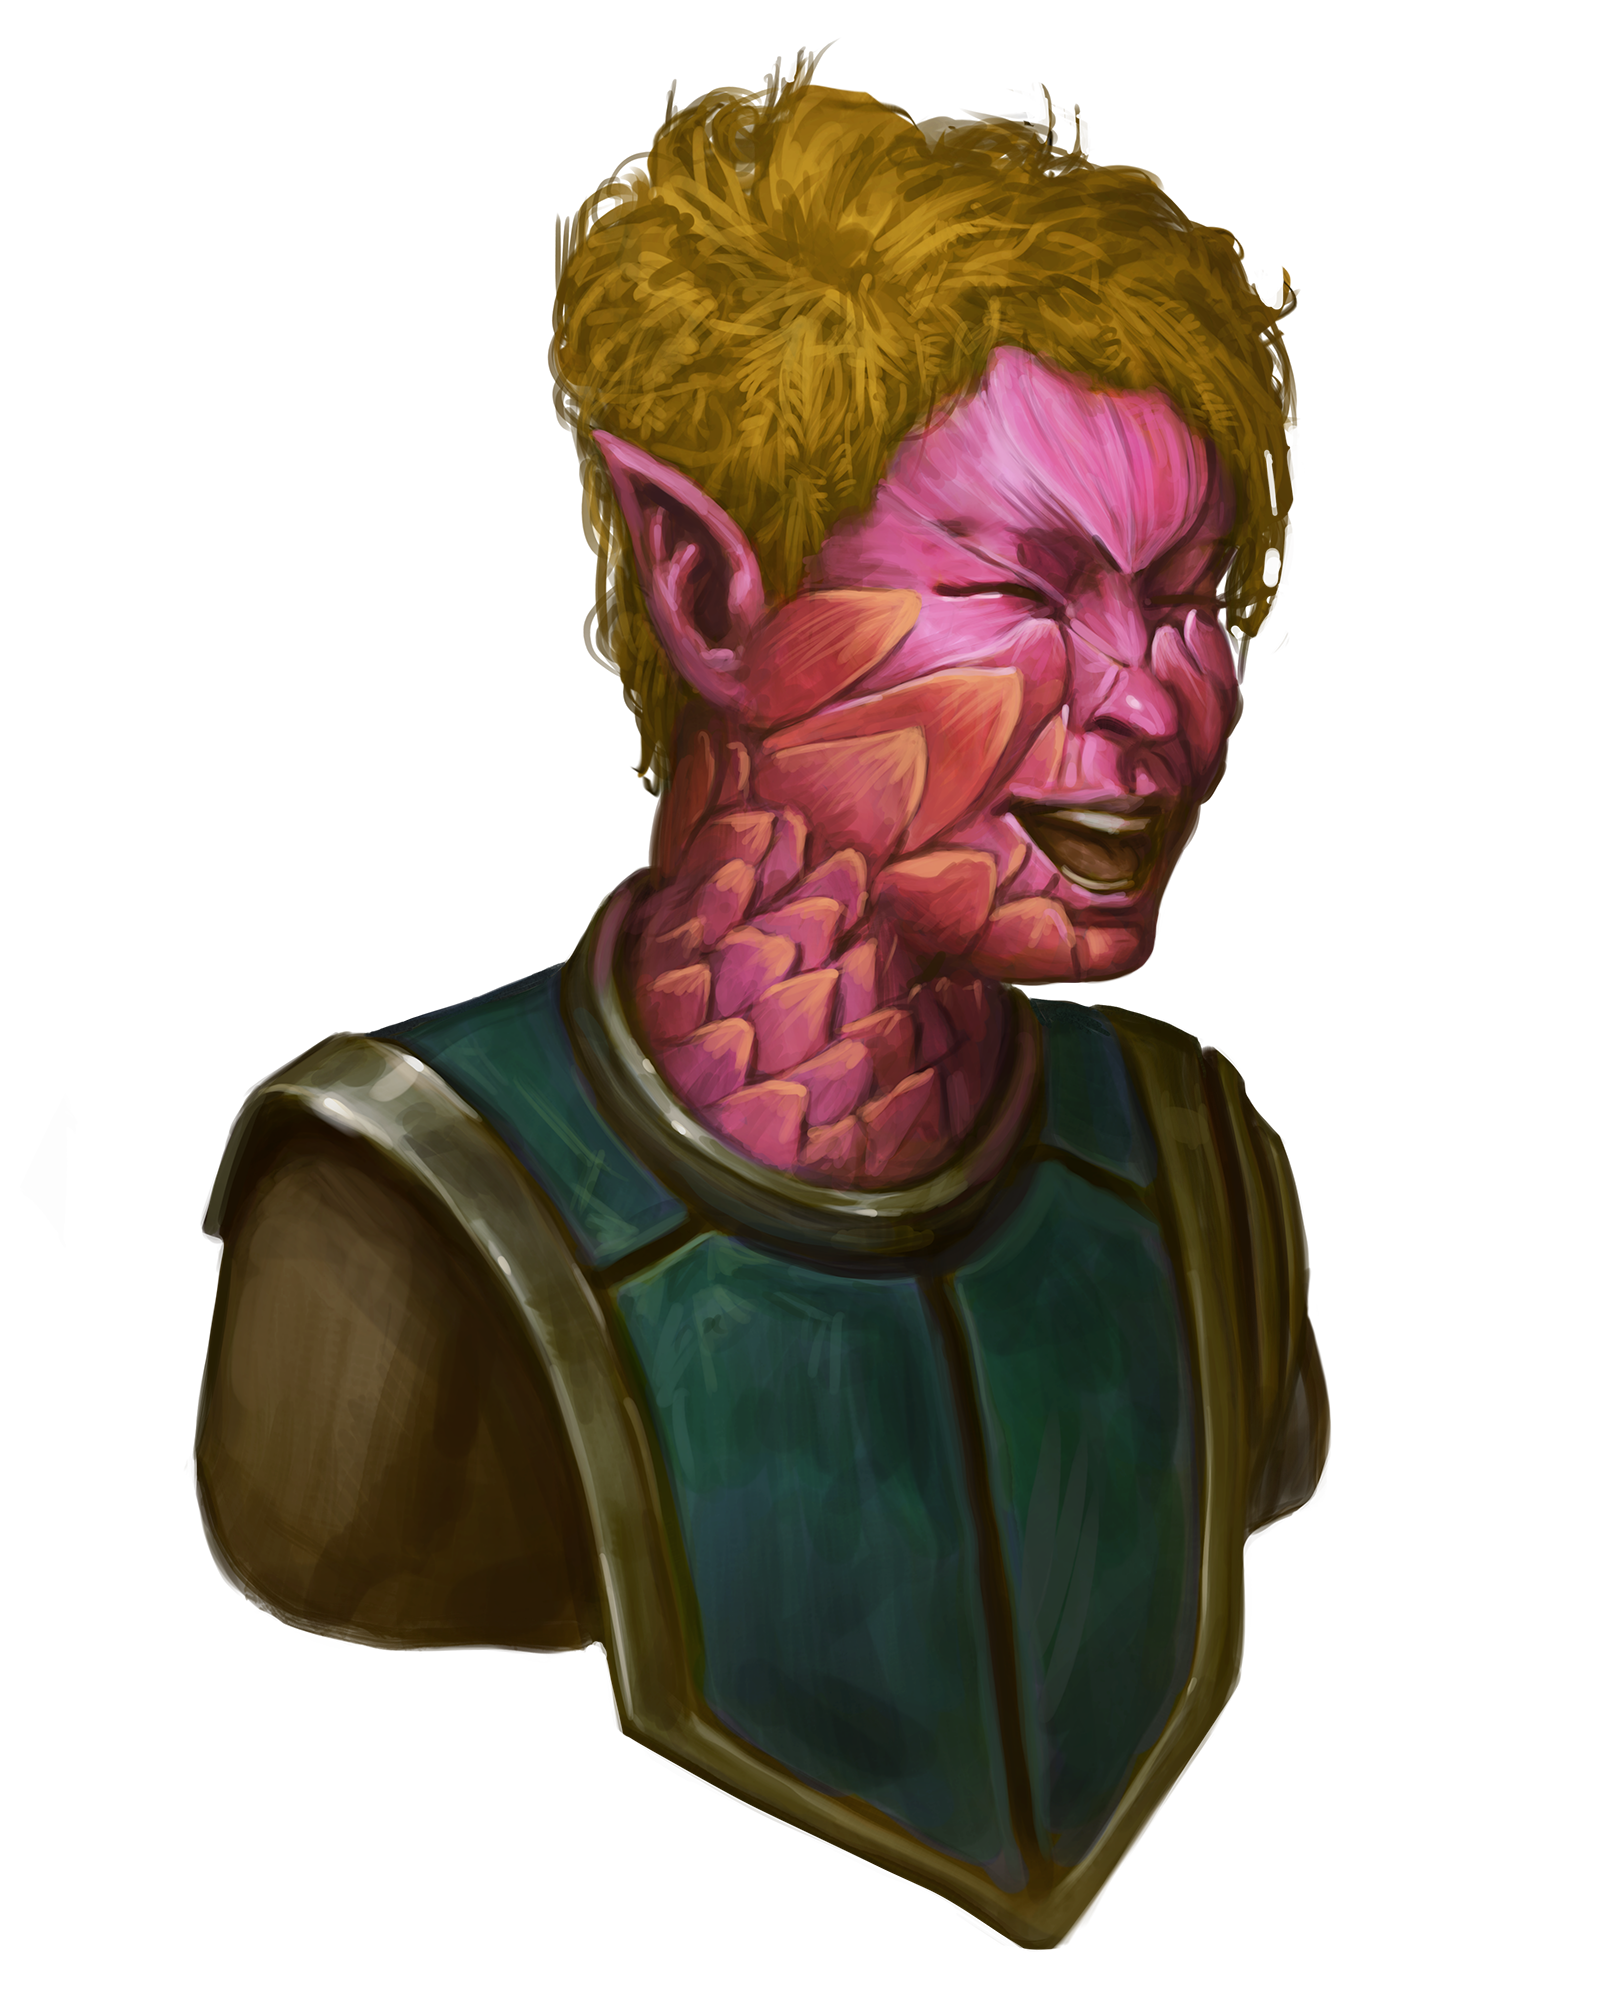 A laughing ghoran, a plant-person with feminine features, blonde hair, pointed ears, and pink skin that looks like flower petals